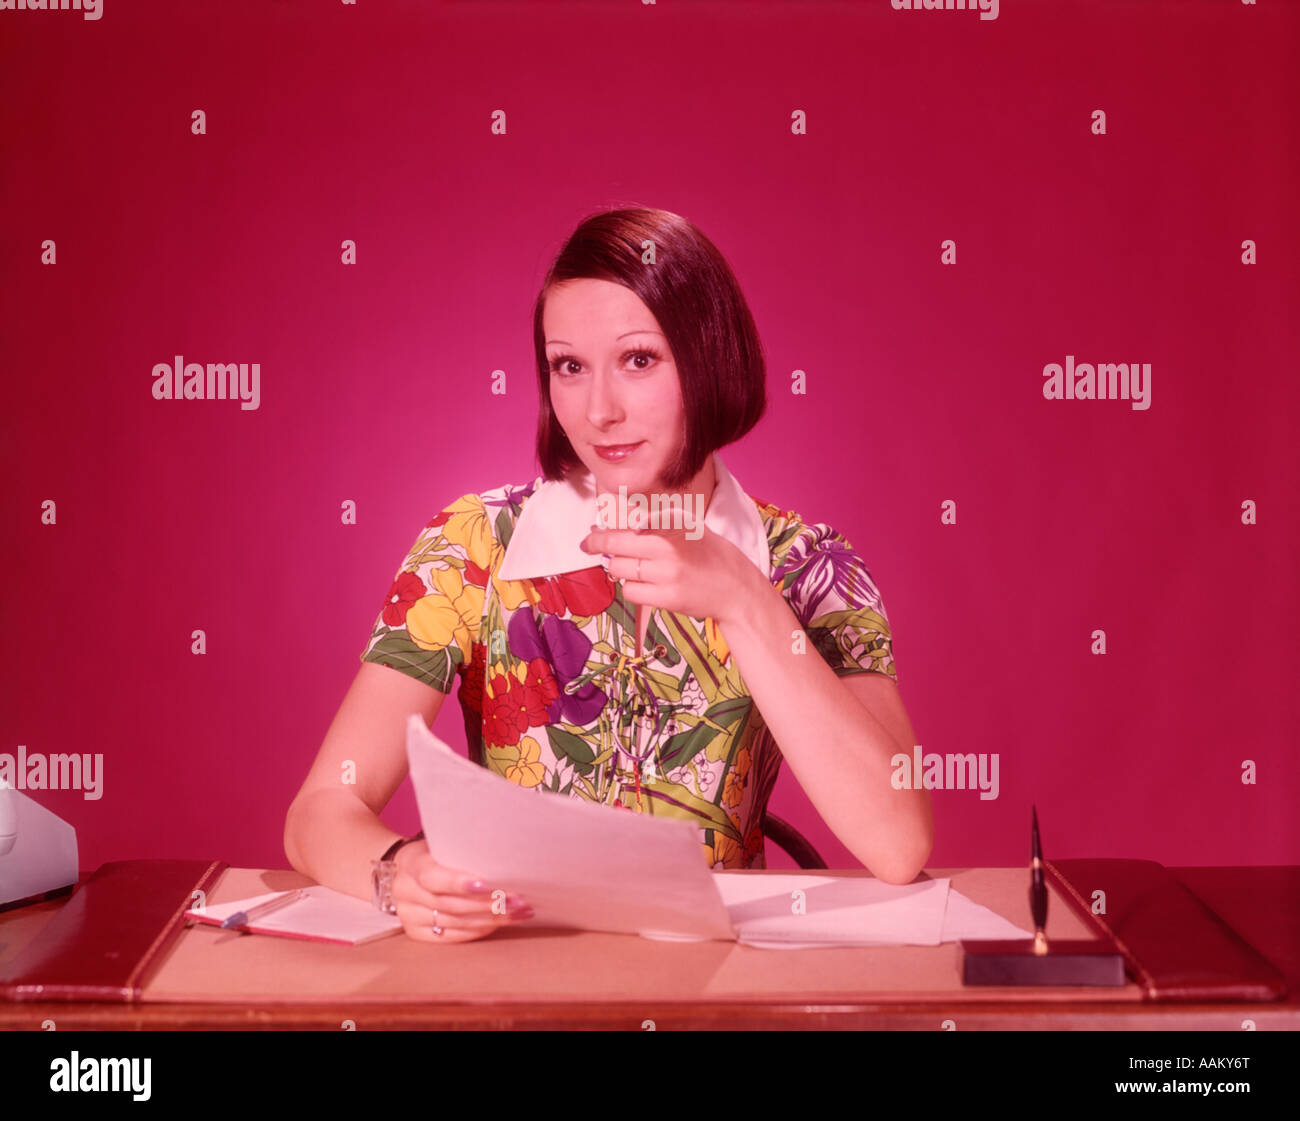 1970s WOMAN AT DESK COLORFUL BLOUSE POINTING TOWARDS LOOKING AT CAMERA Stock Photo